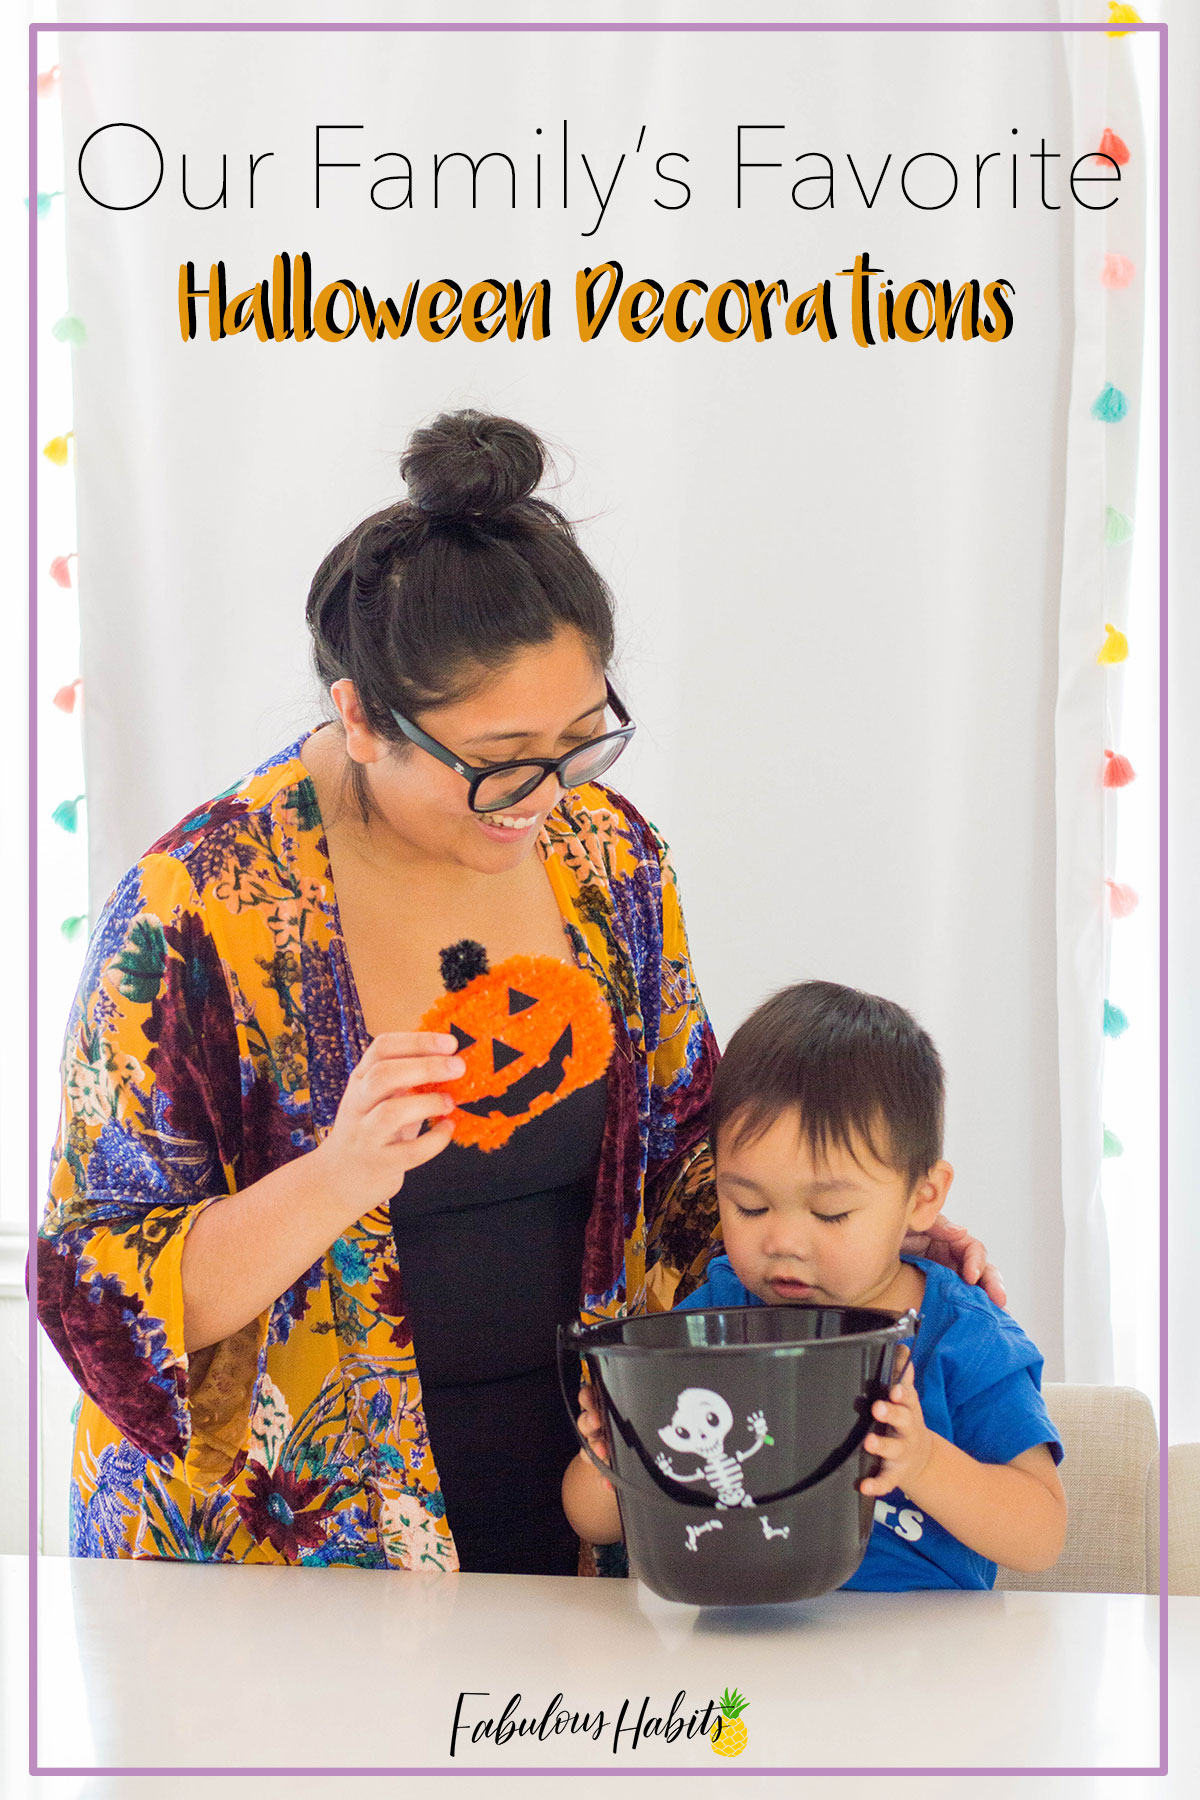 We gotta impress those trick or treaters! Here are ways to decorate your home for Halloween this year! I've rounded up some of the best Halloween decoration ideas - check 'em out on Fabulous Habits! #halloweendecorations